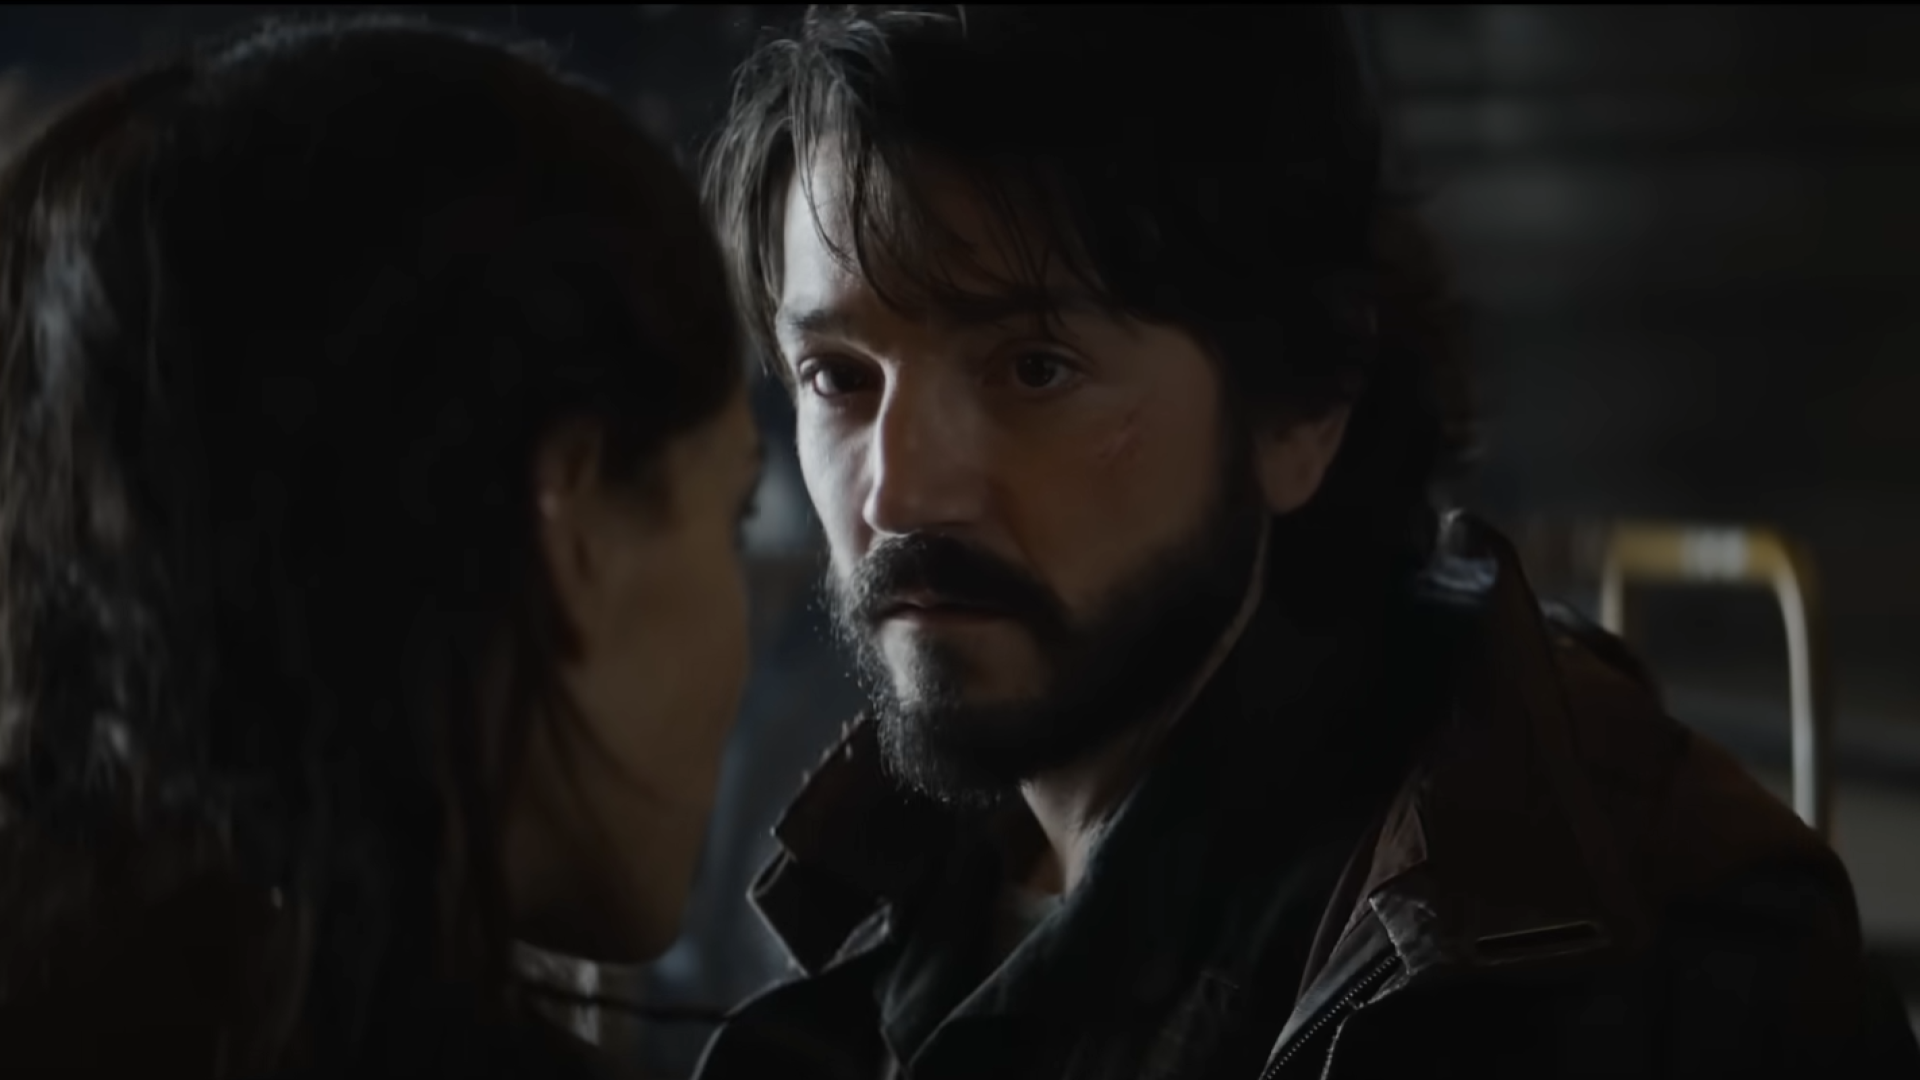 Diego Luca as Cassian Andor in the new titular Star Wars series serving as a prequel to Rogue One.